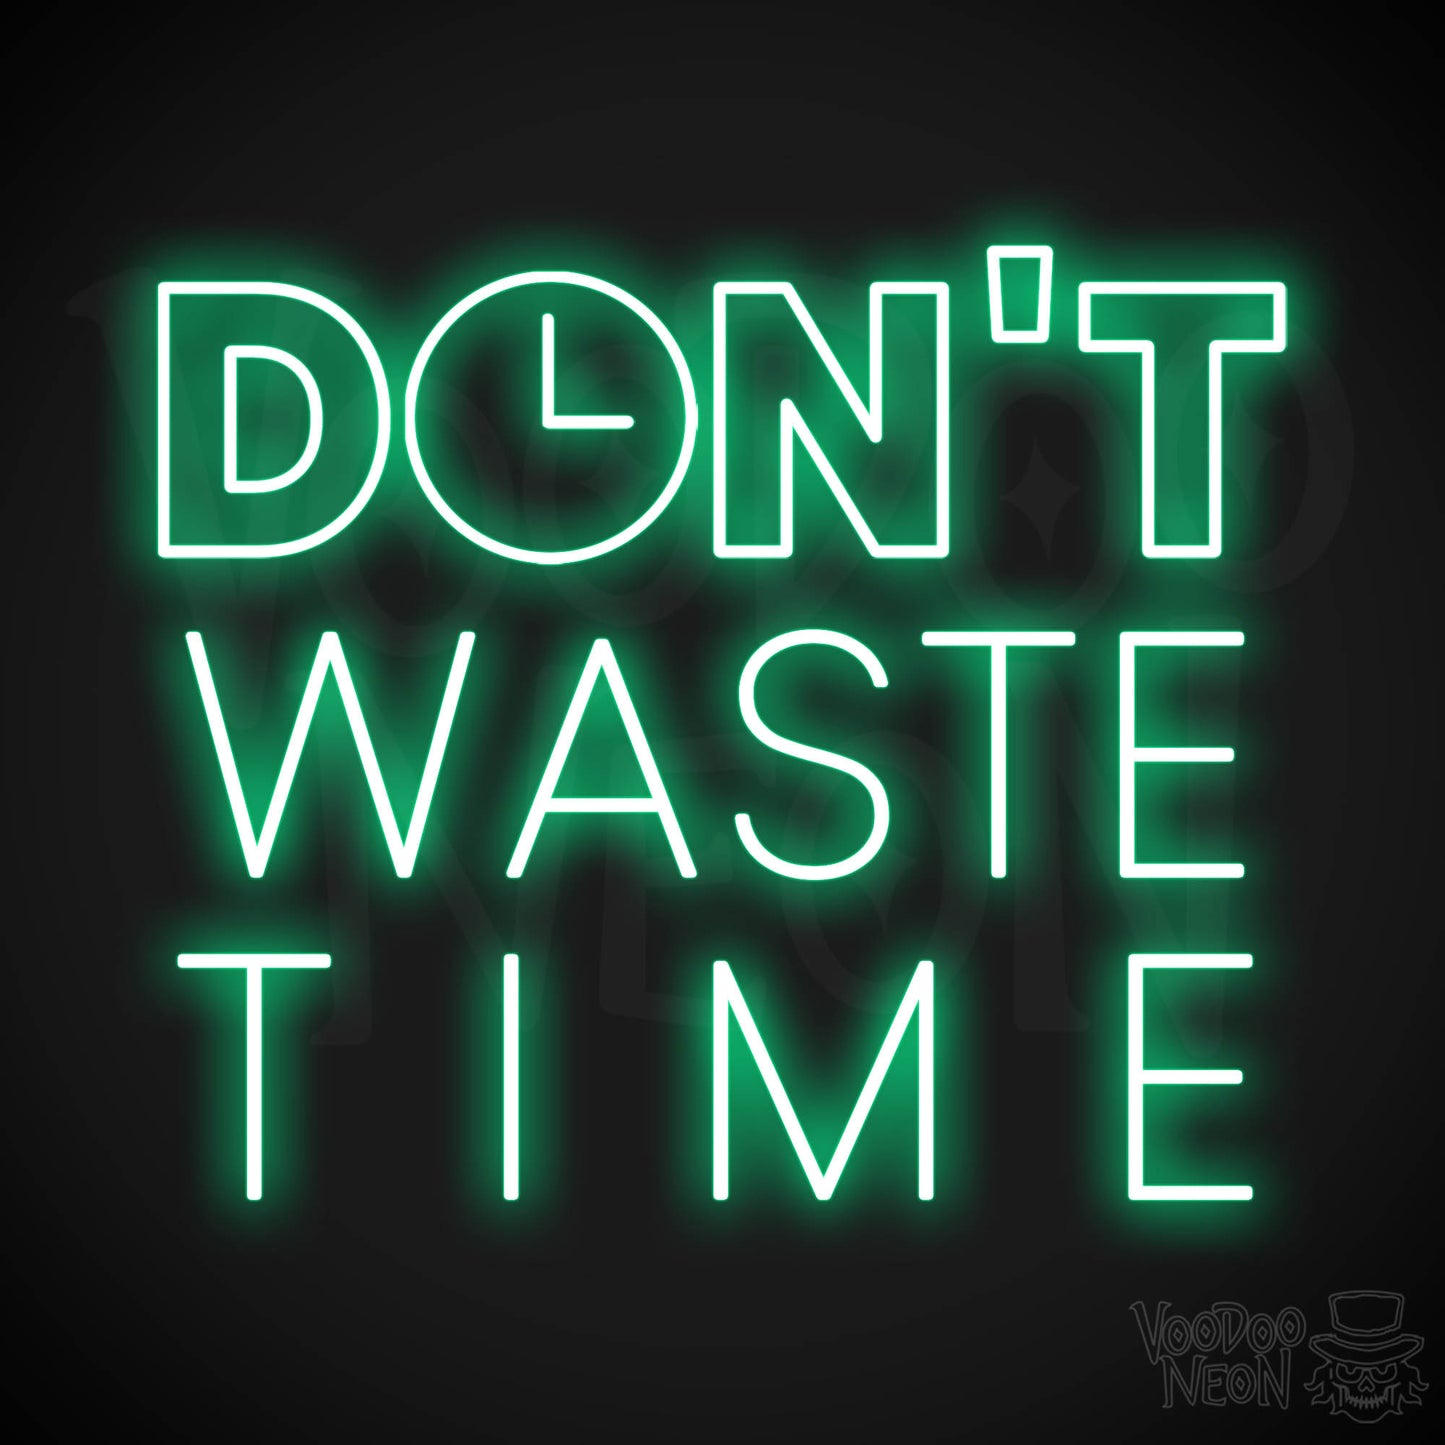 Don't Waste Time LED Neon - Green